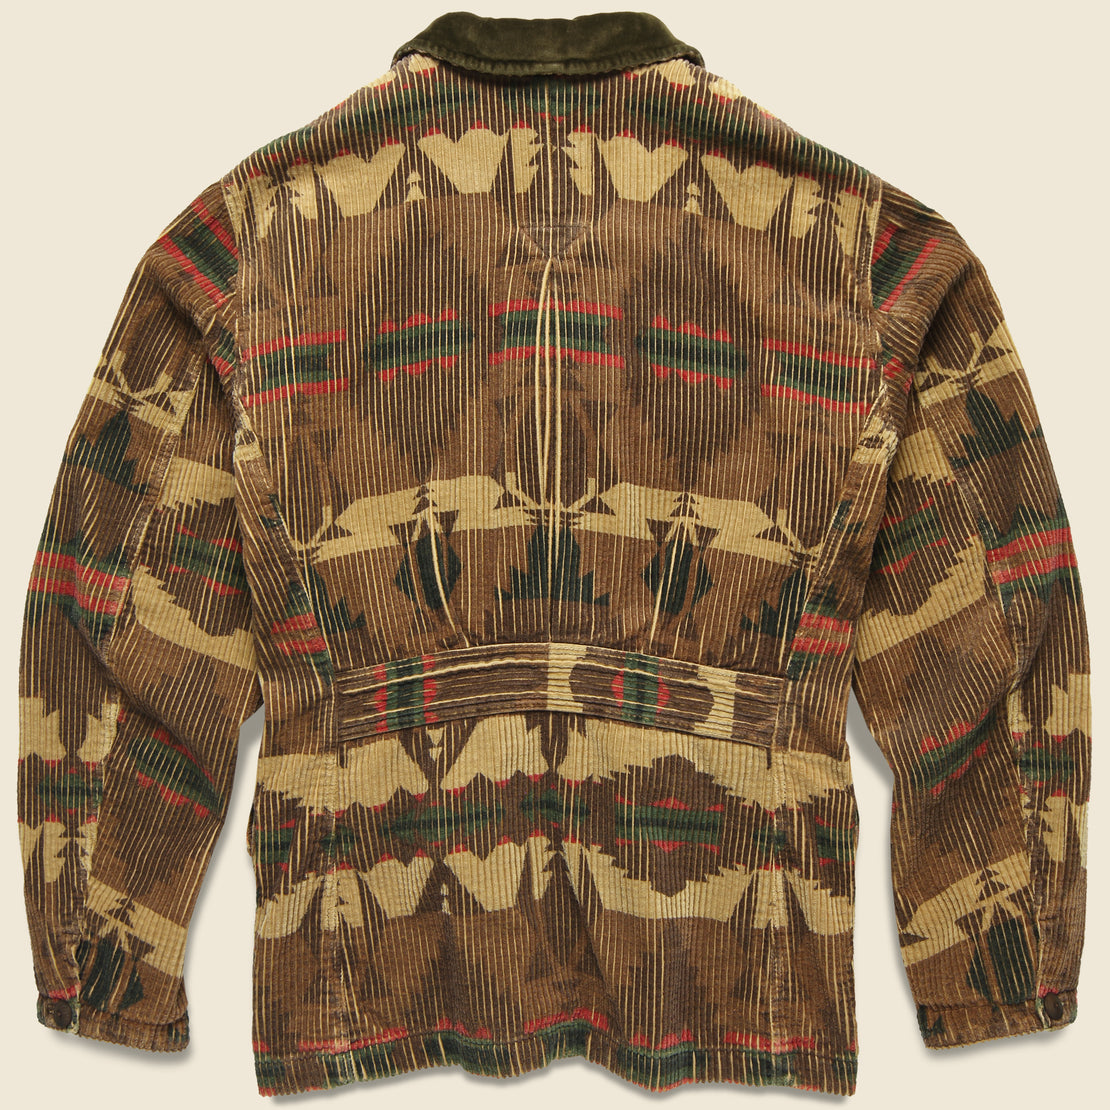 Willand Printed Corduroy Jacket - Tan/Brown/Multi - RRL - STAG Provisions - Outerwear - Coat / Jacket